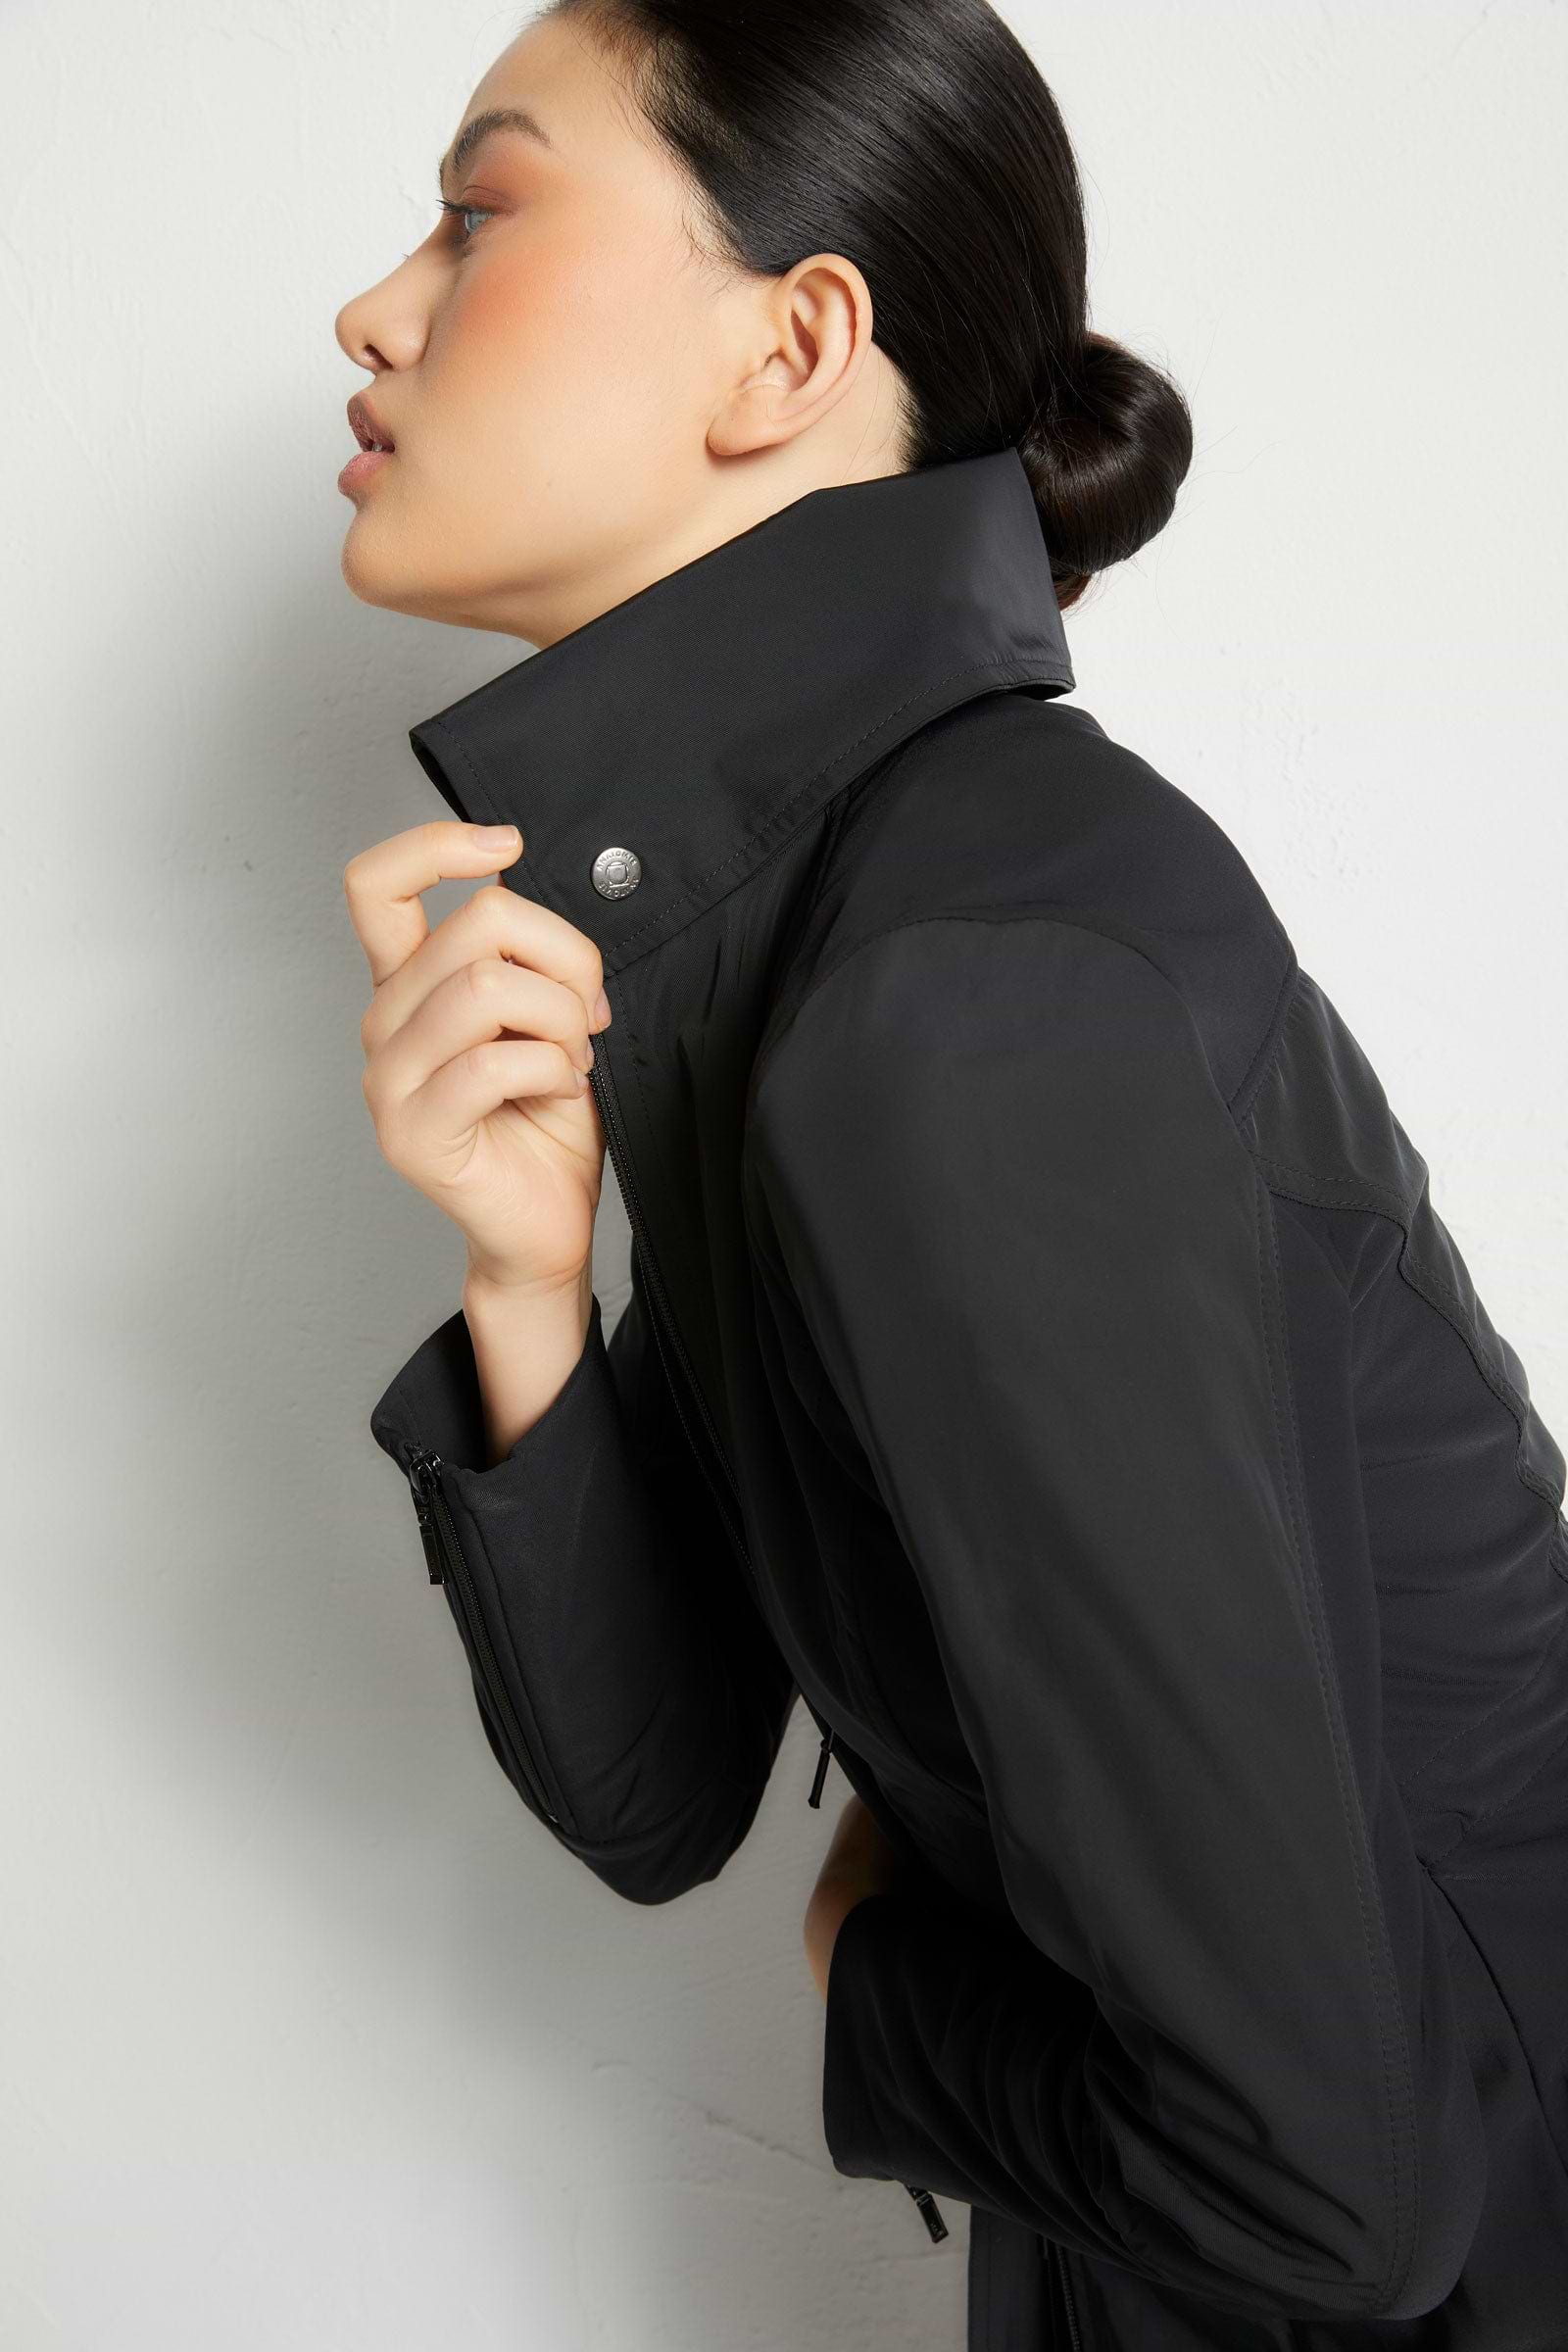 The Best Travel Jacket. Woman Showing the Side Profile of a Travel City Slick Jacket in Black